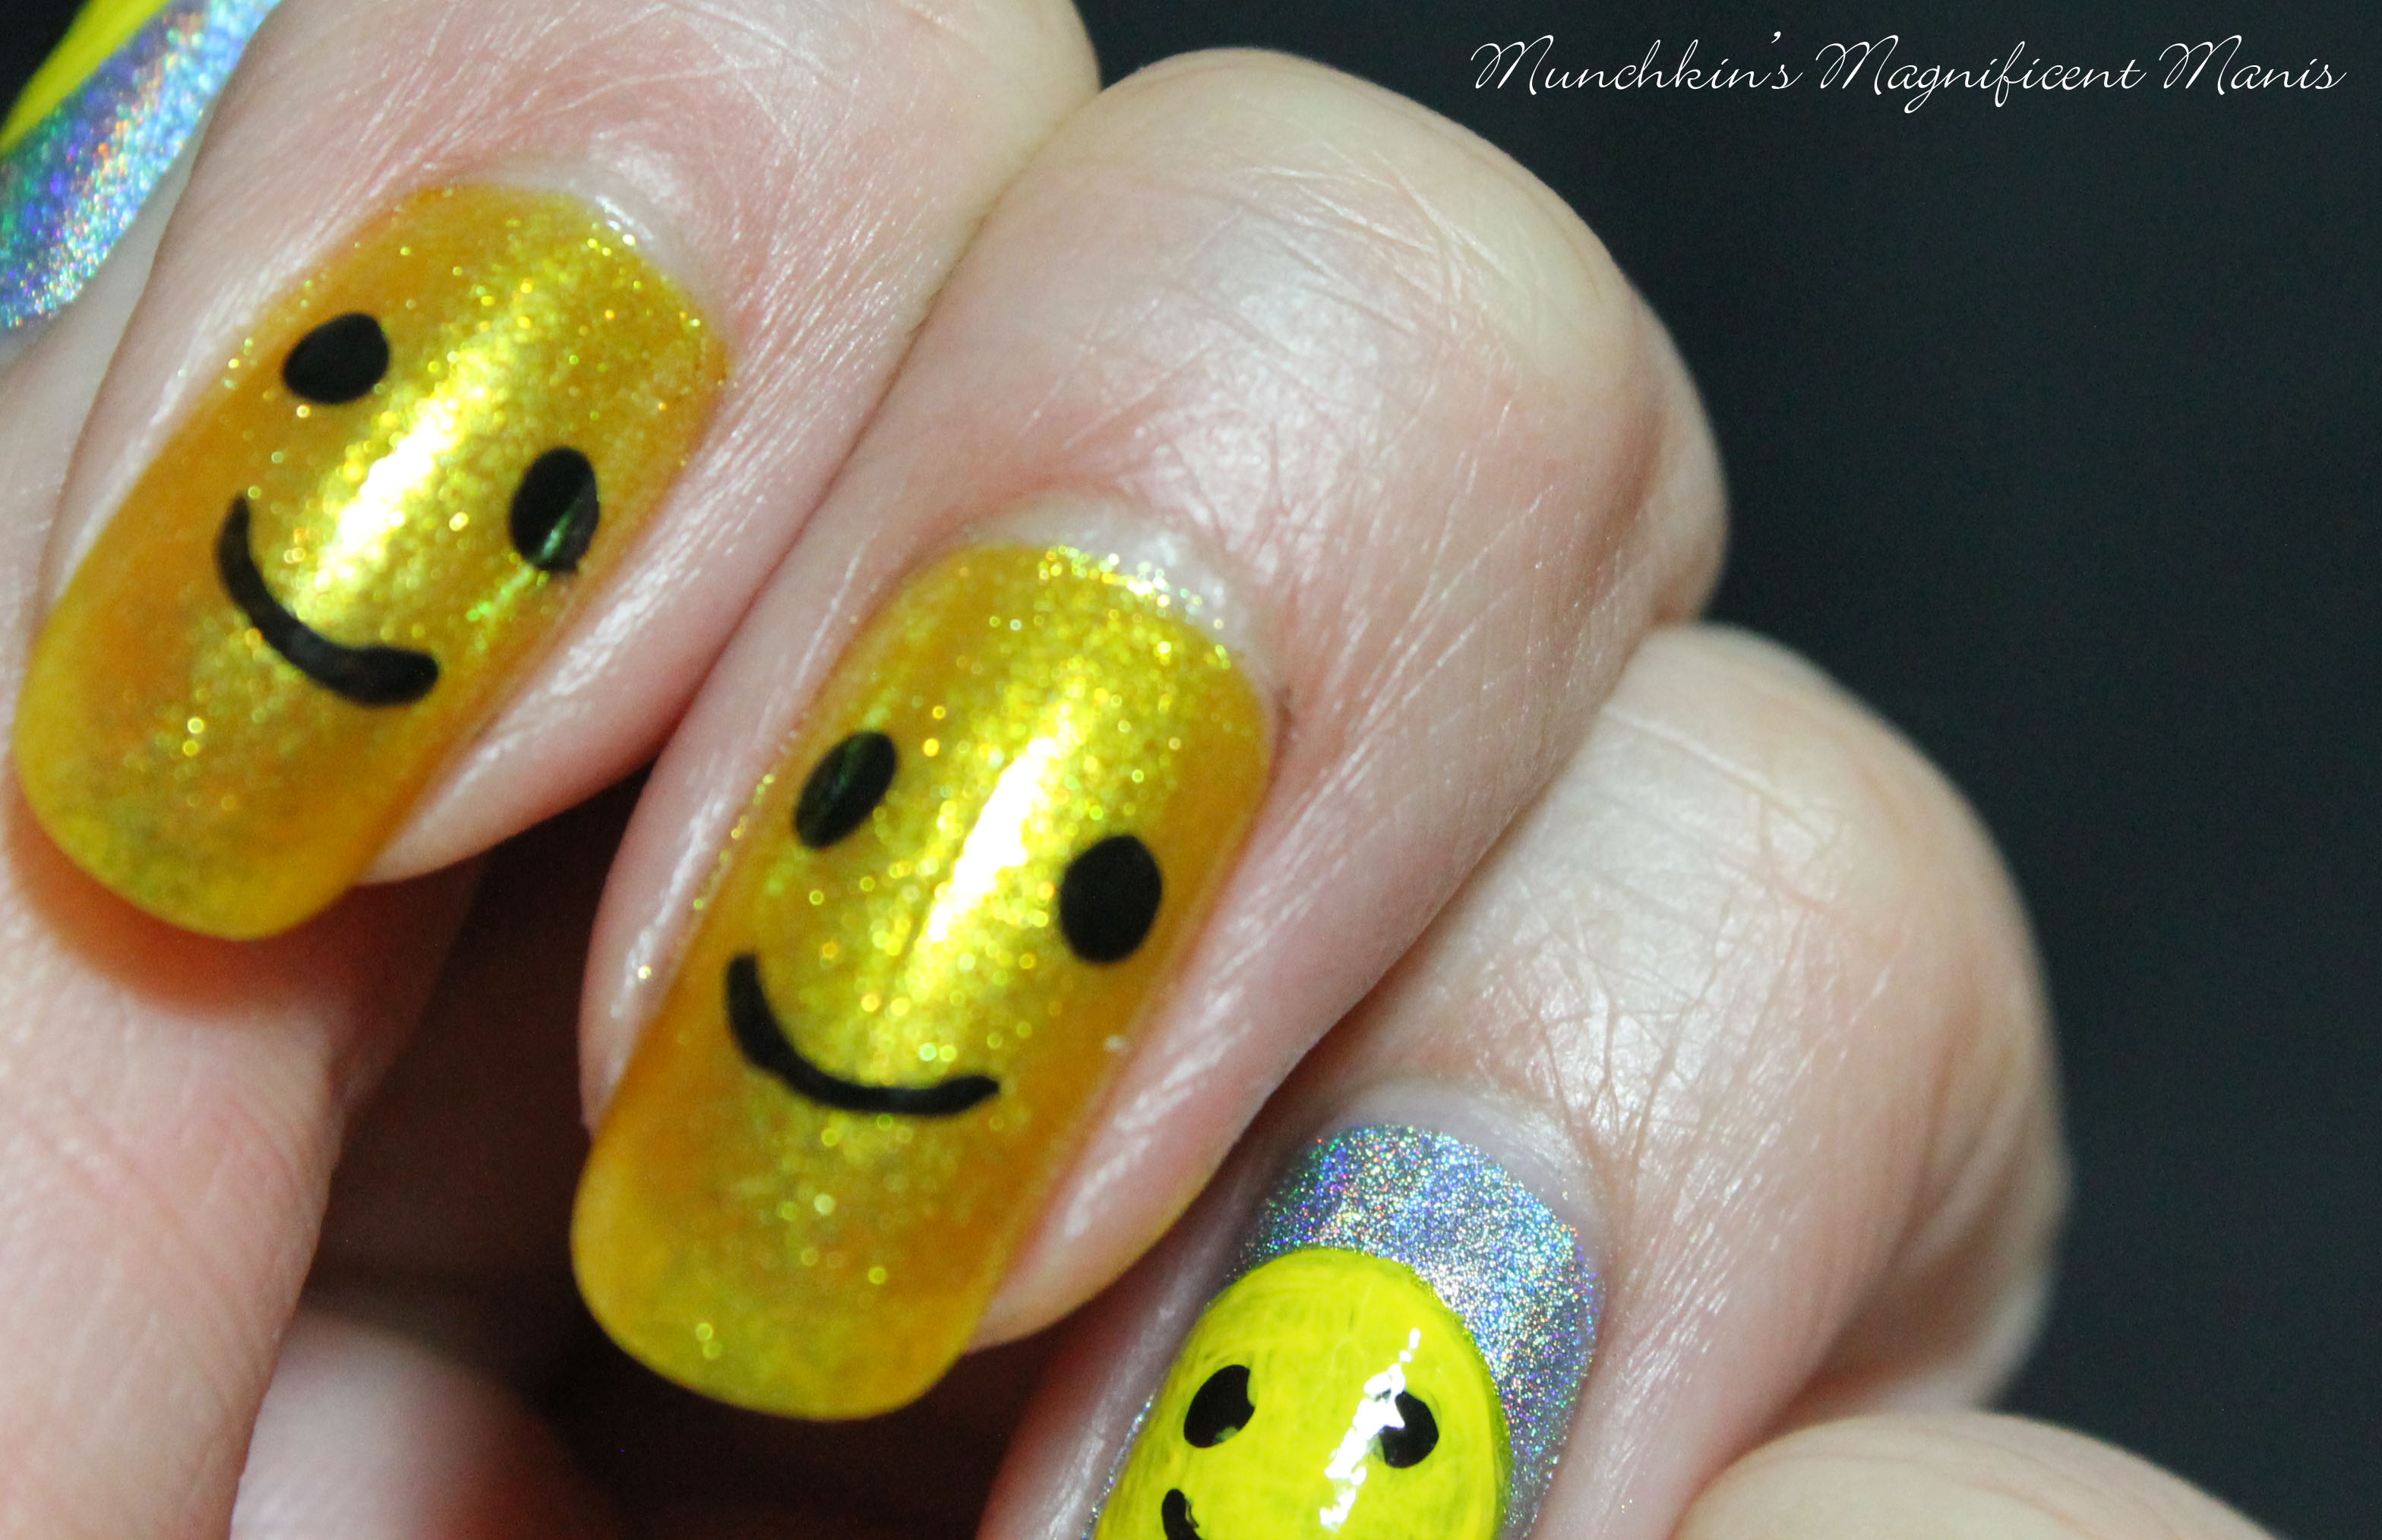 2. Cute Happy Face Nails - wide 5